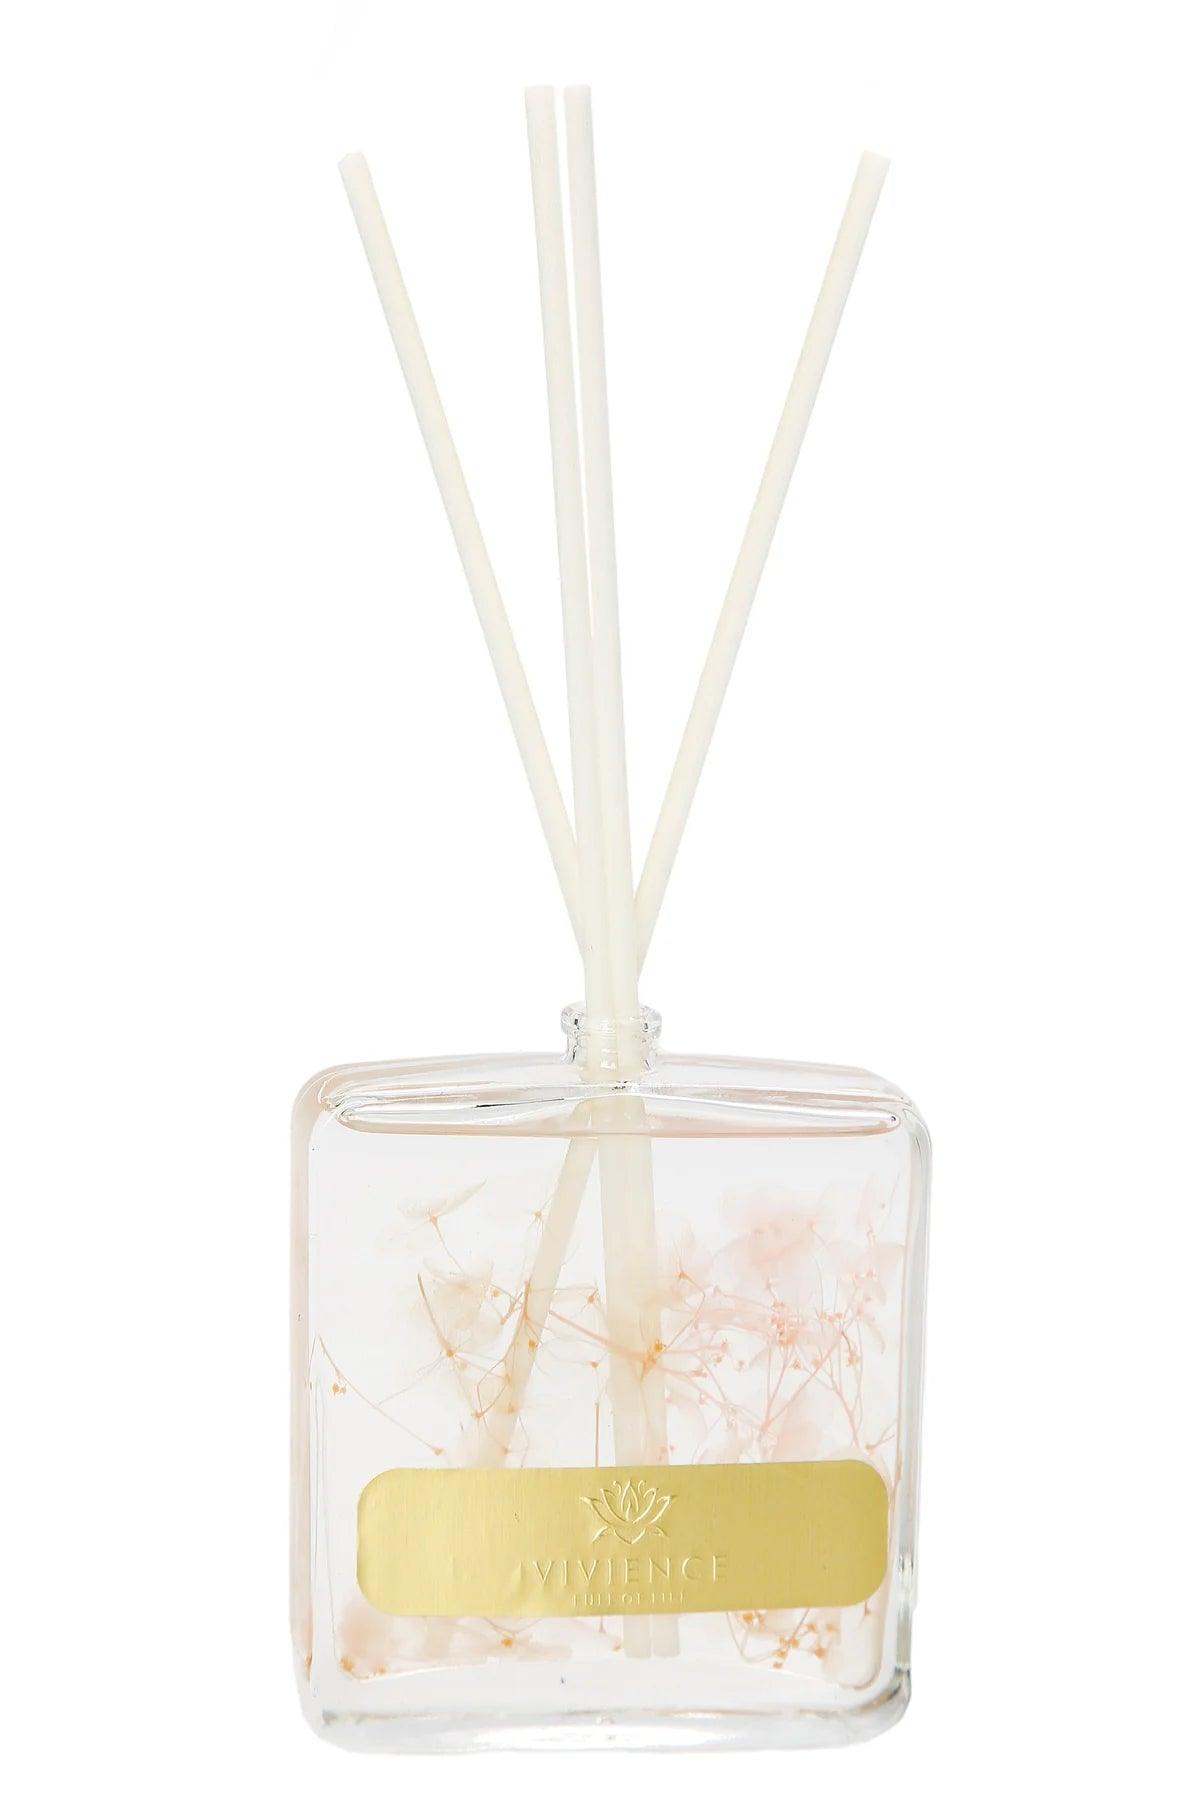 Clear Bottle Reed Diffuser With Pink & White Flower And White Reeds, "Lily Of The Valley" Scent - Elegant Linen